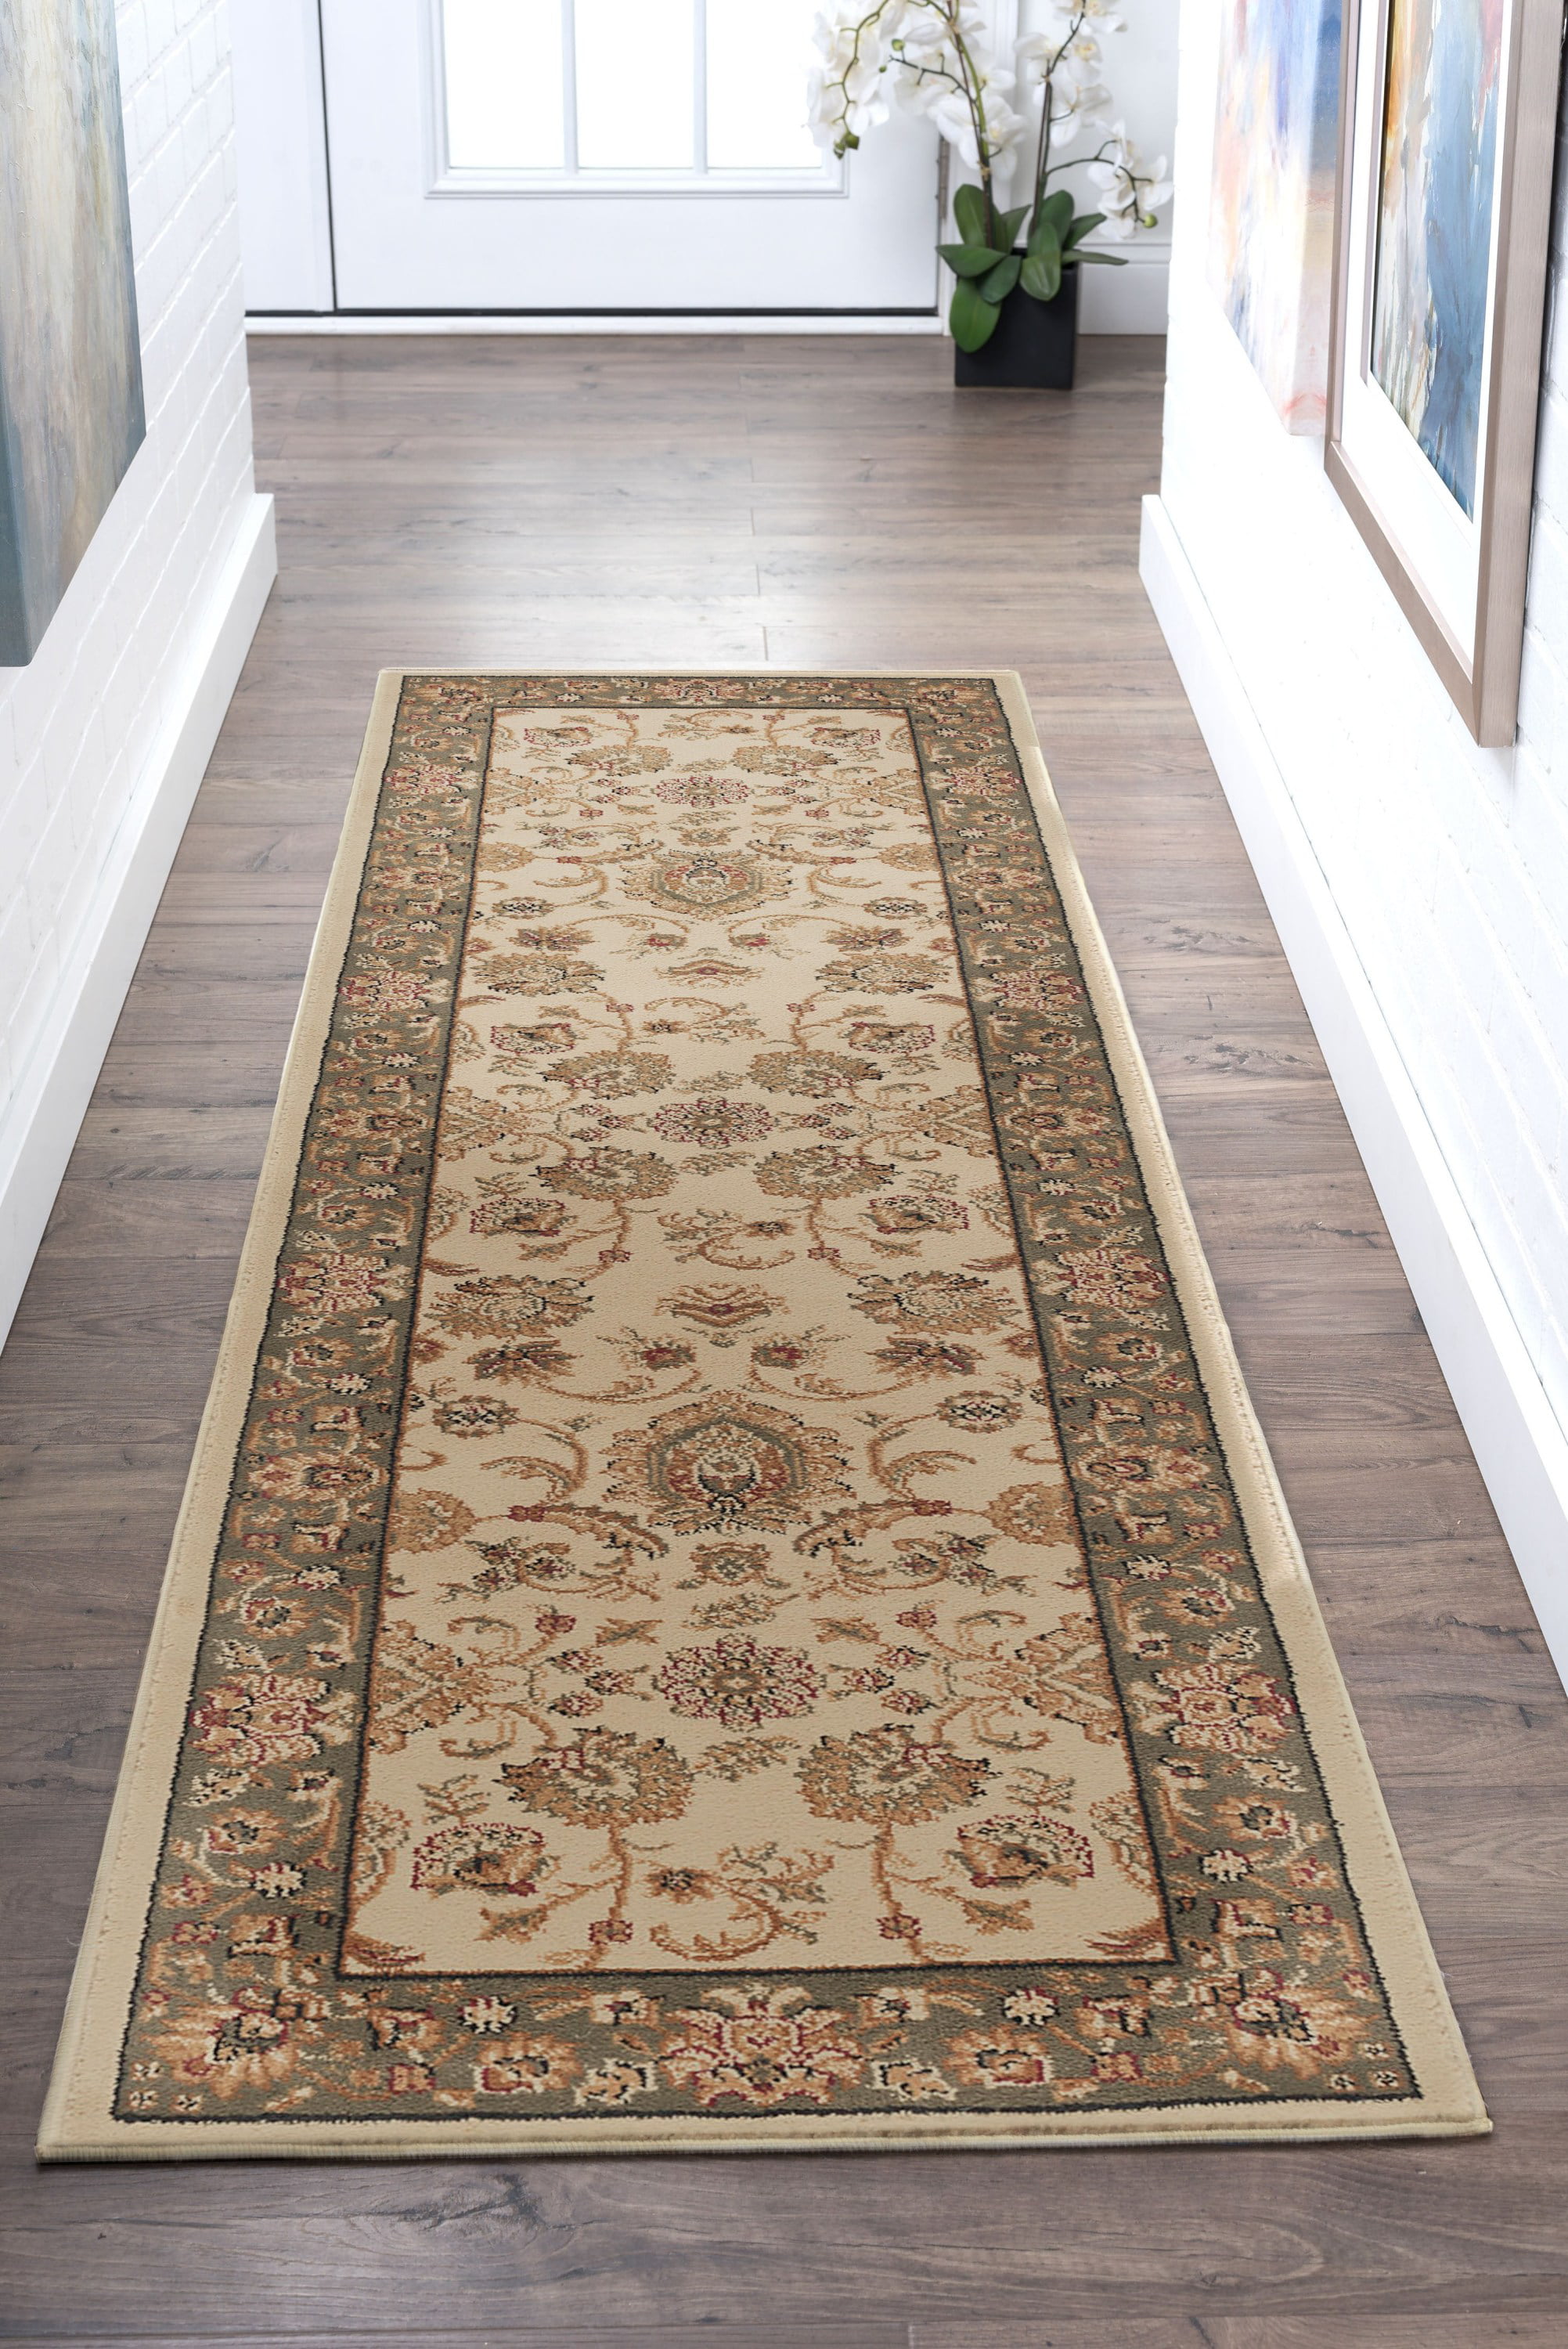 Transitional 2x8 Area Rug (2'3'' x 7'3'') Border Ivory, Moss Green ...